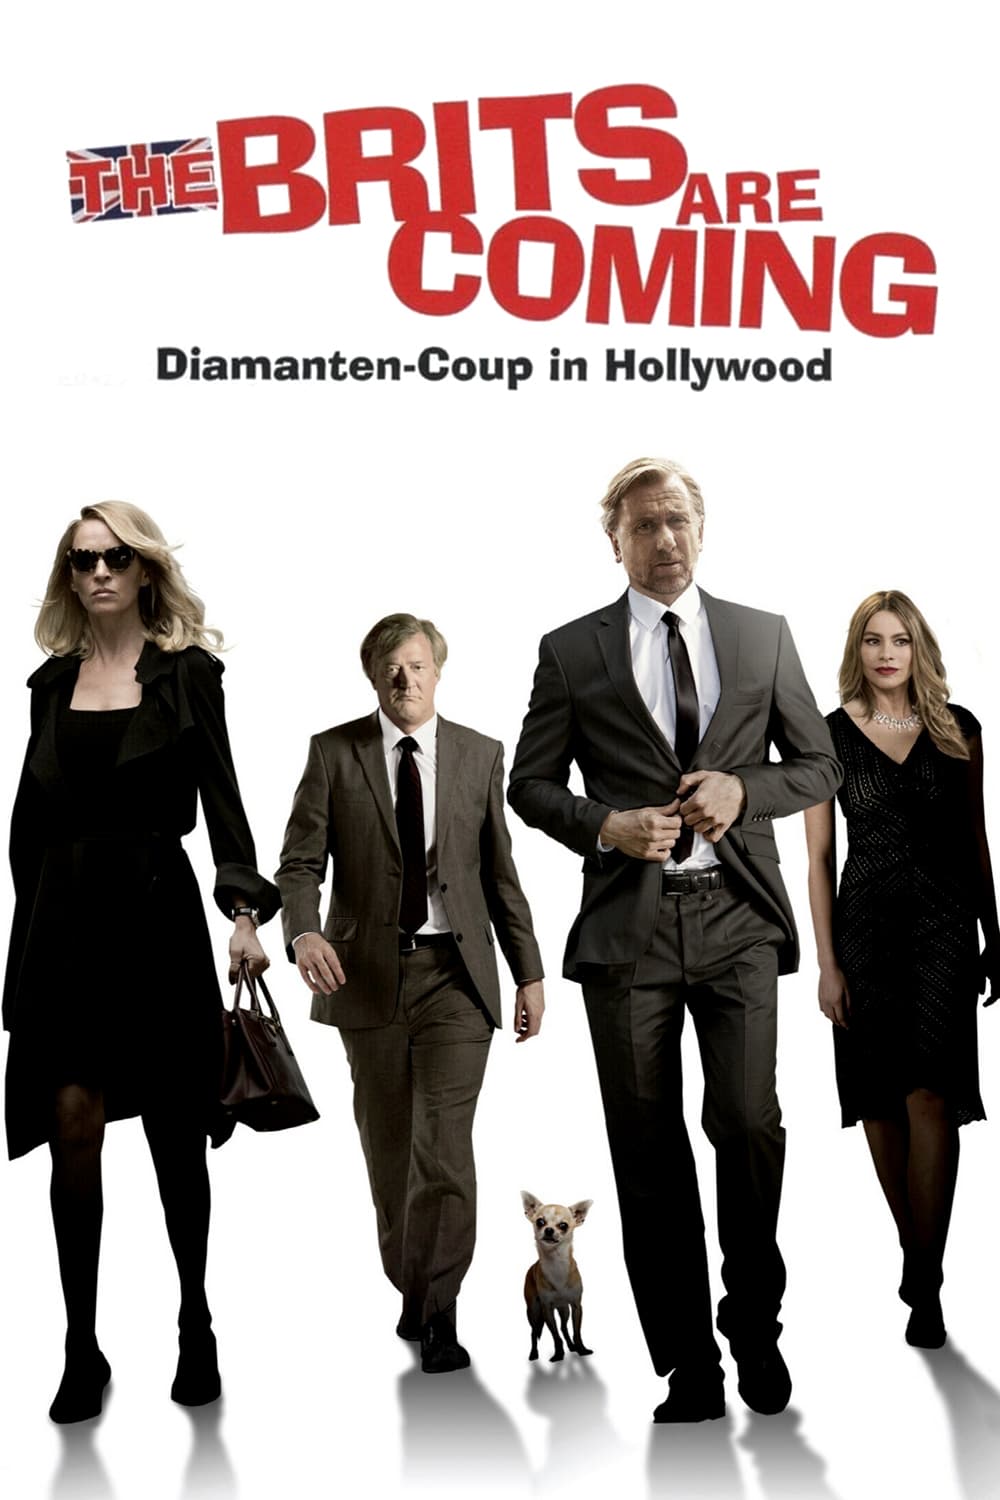 Plakat von "The Brits Are Coming - Diamanten-Coup in Hollywood"